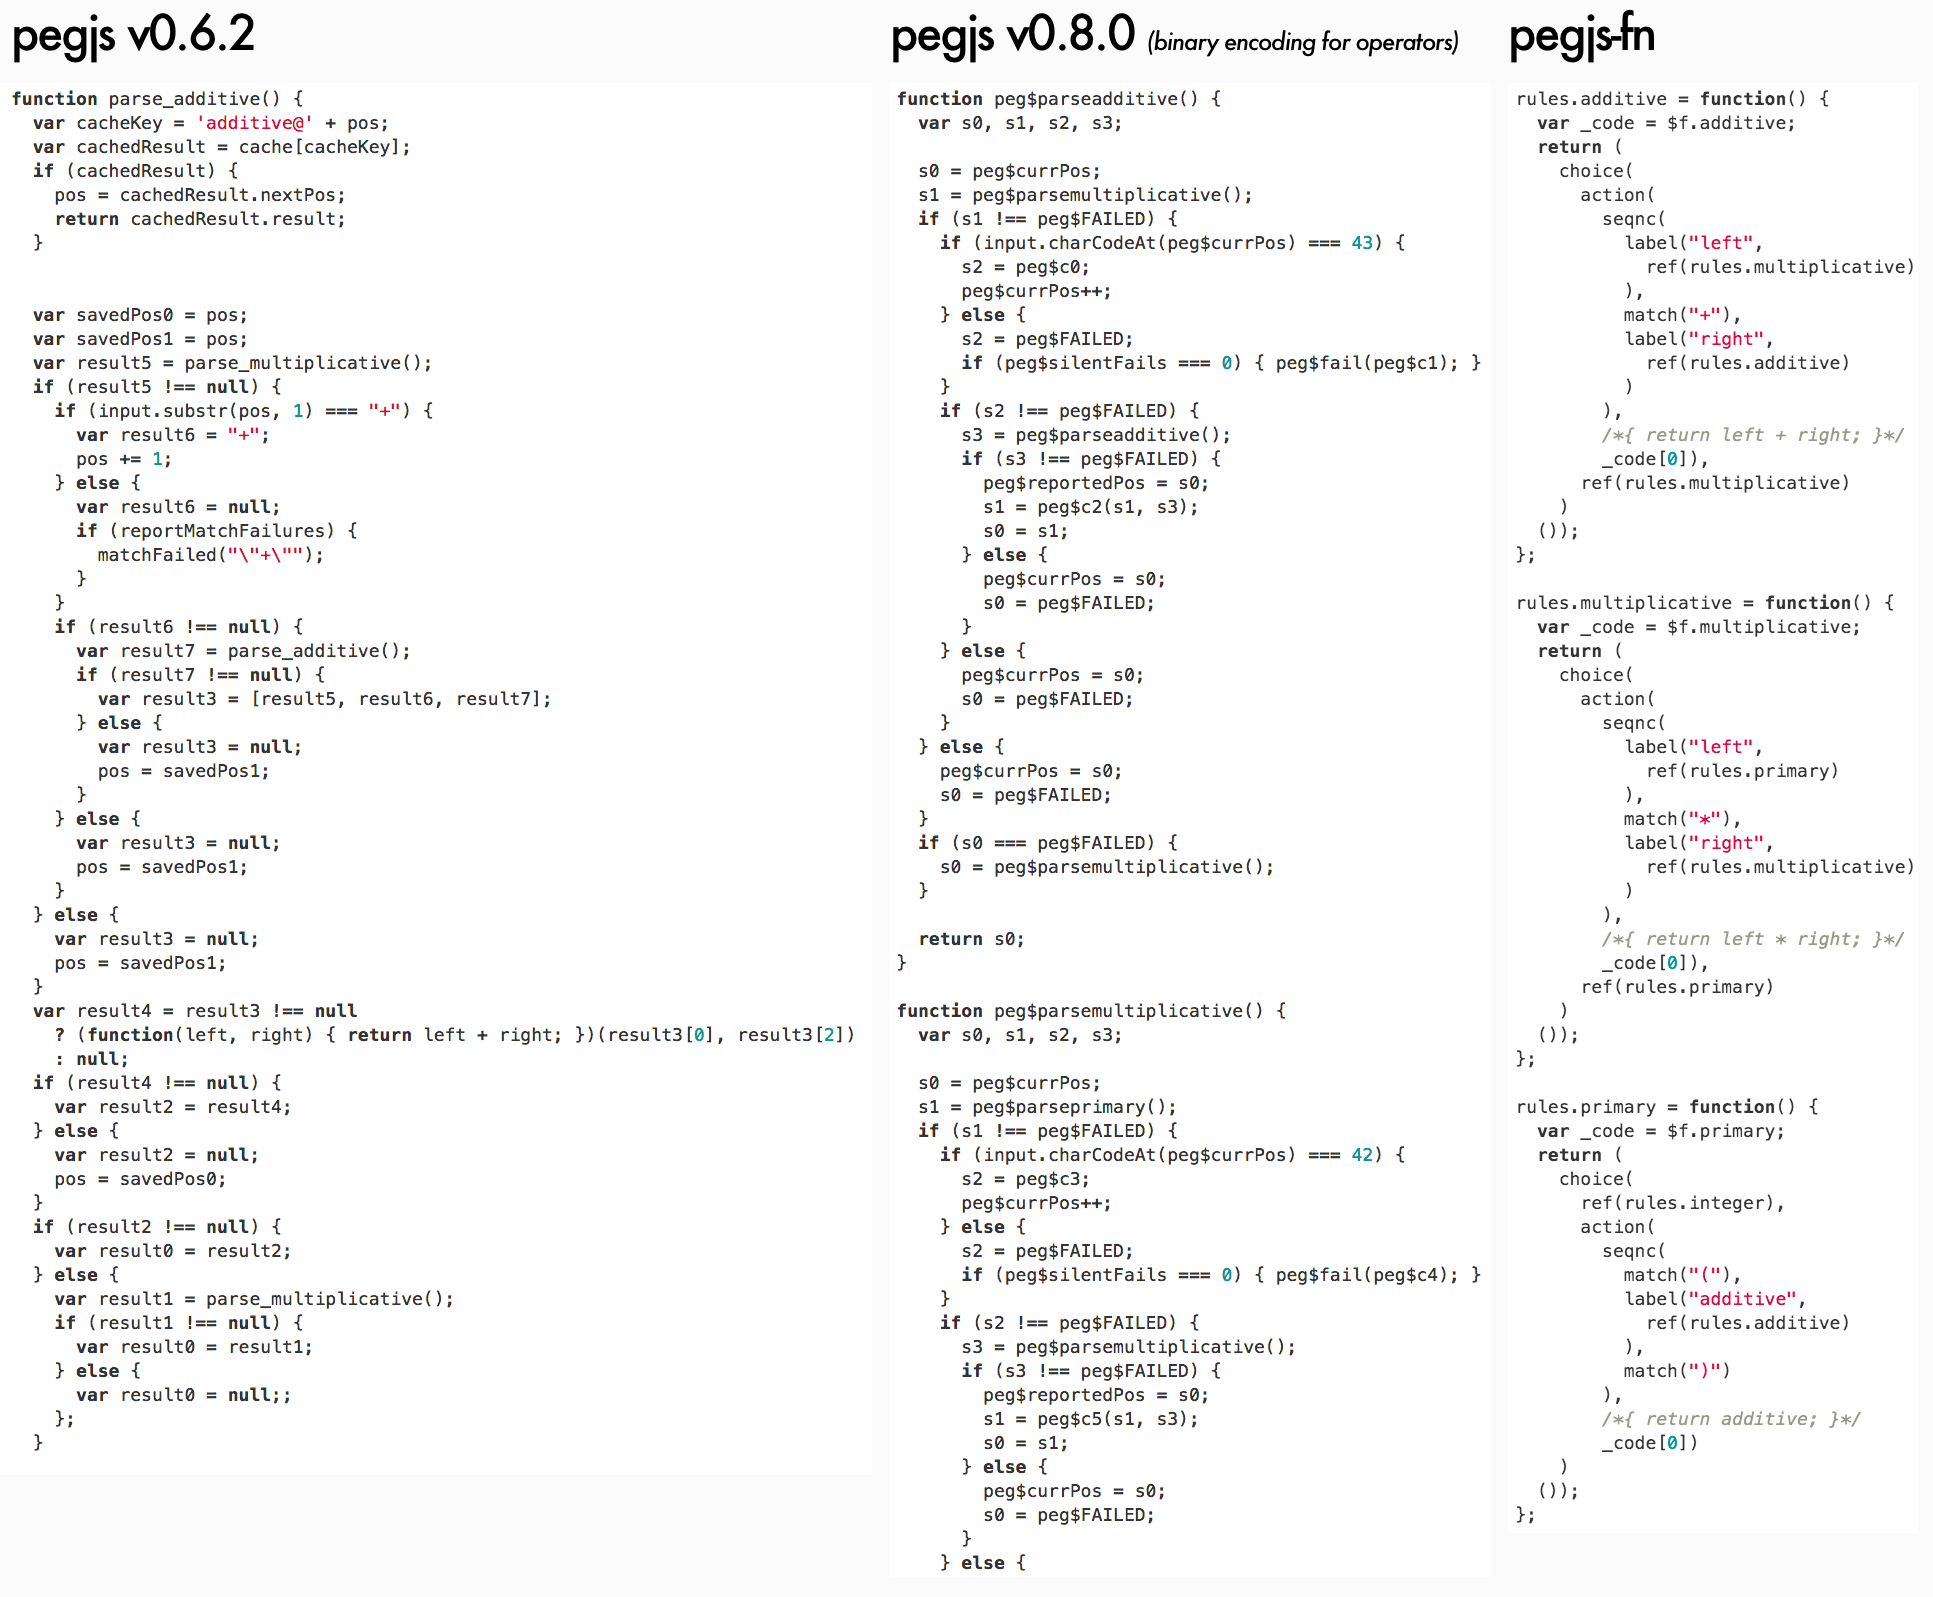 Comparison of generated parsers